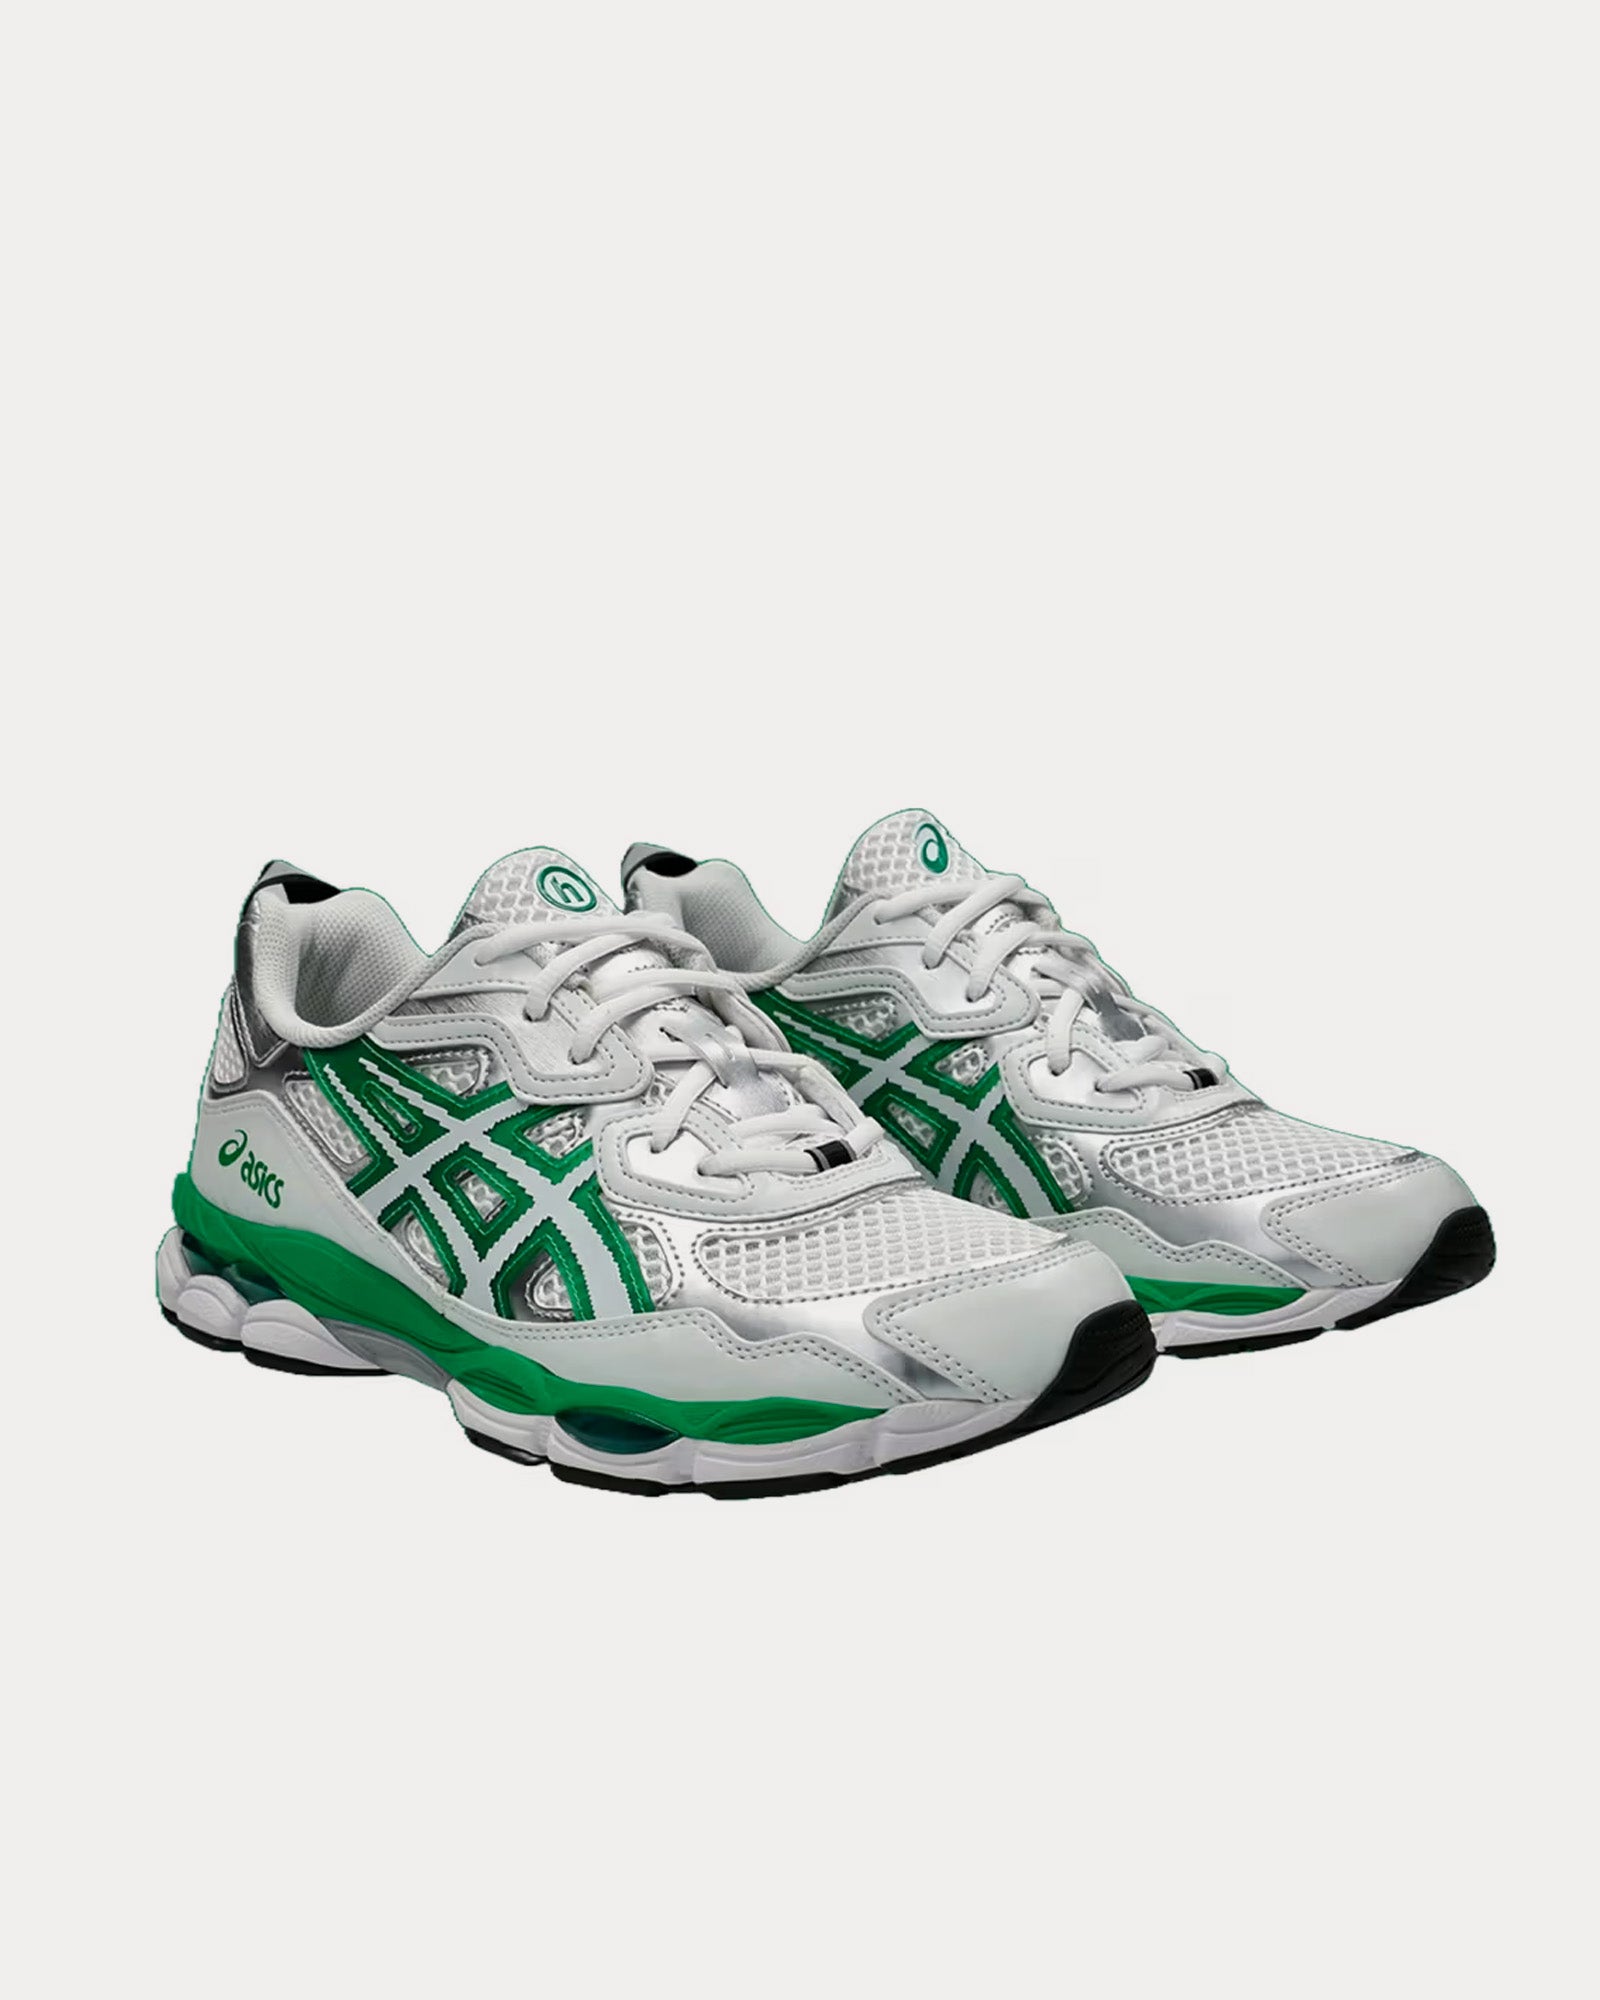 Asics x Hidden.NY Gel-NYC White / Silver / Green Low Top Sneakers 